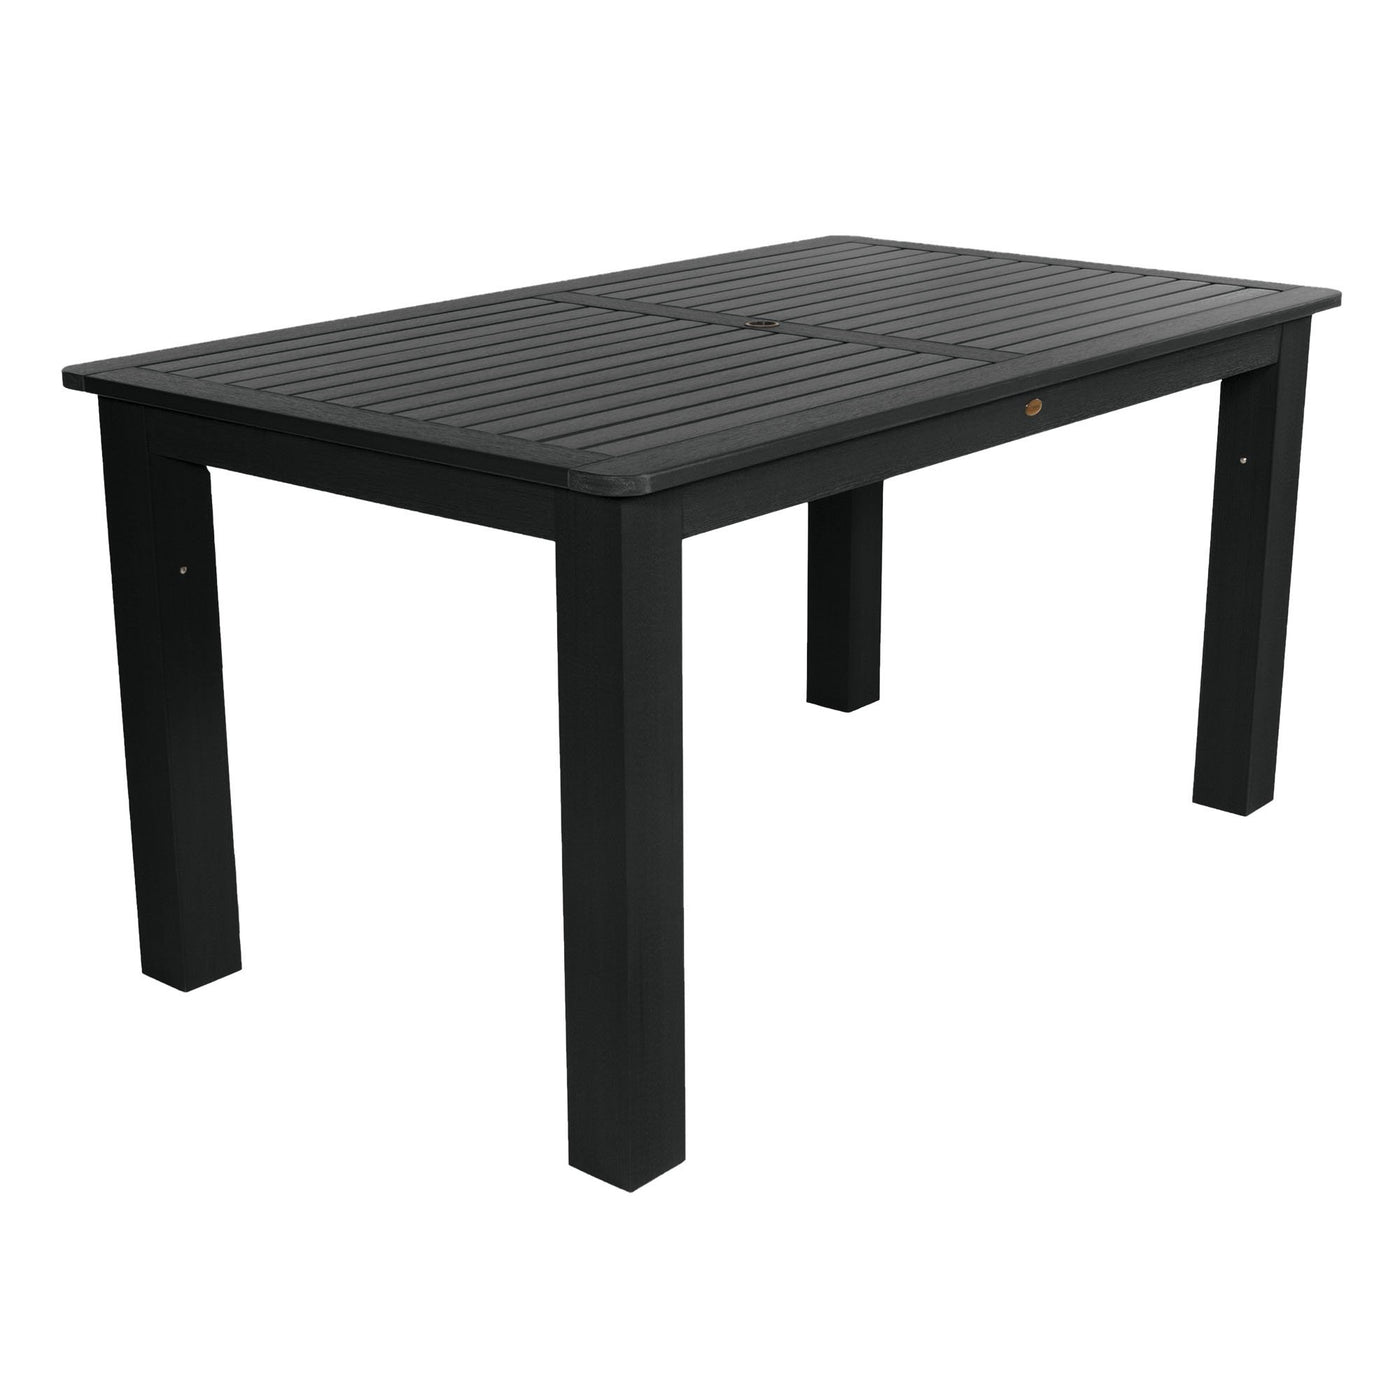 Rectangular 42in x 72in Outdoor Dining Table - Counter Height Dining Highwood USA Black 